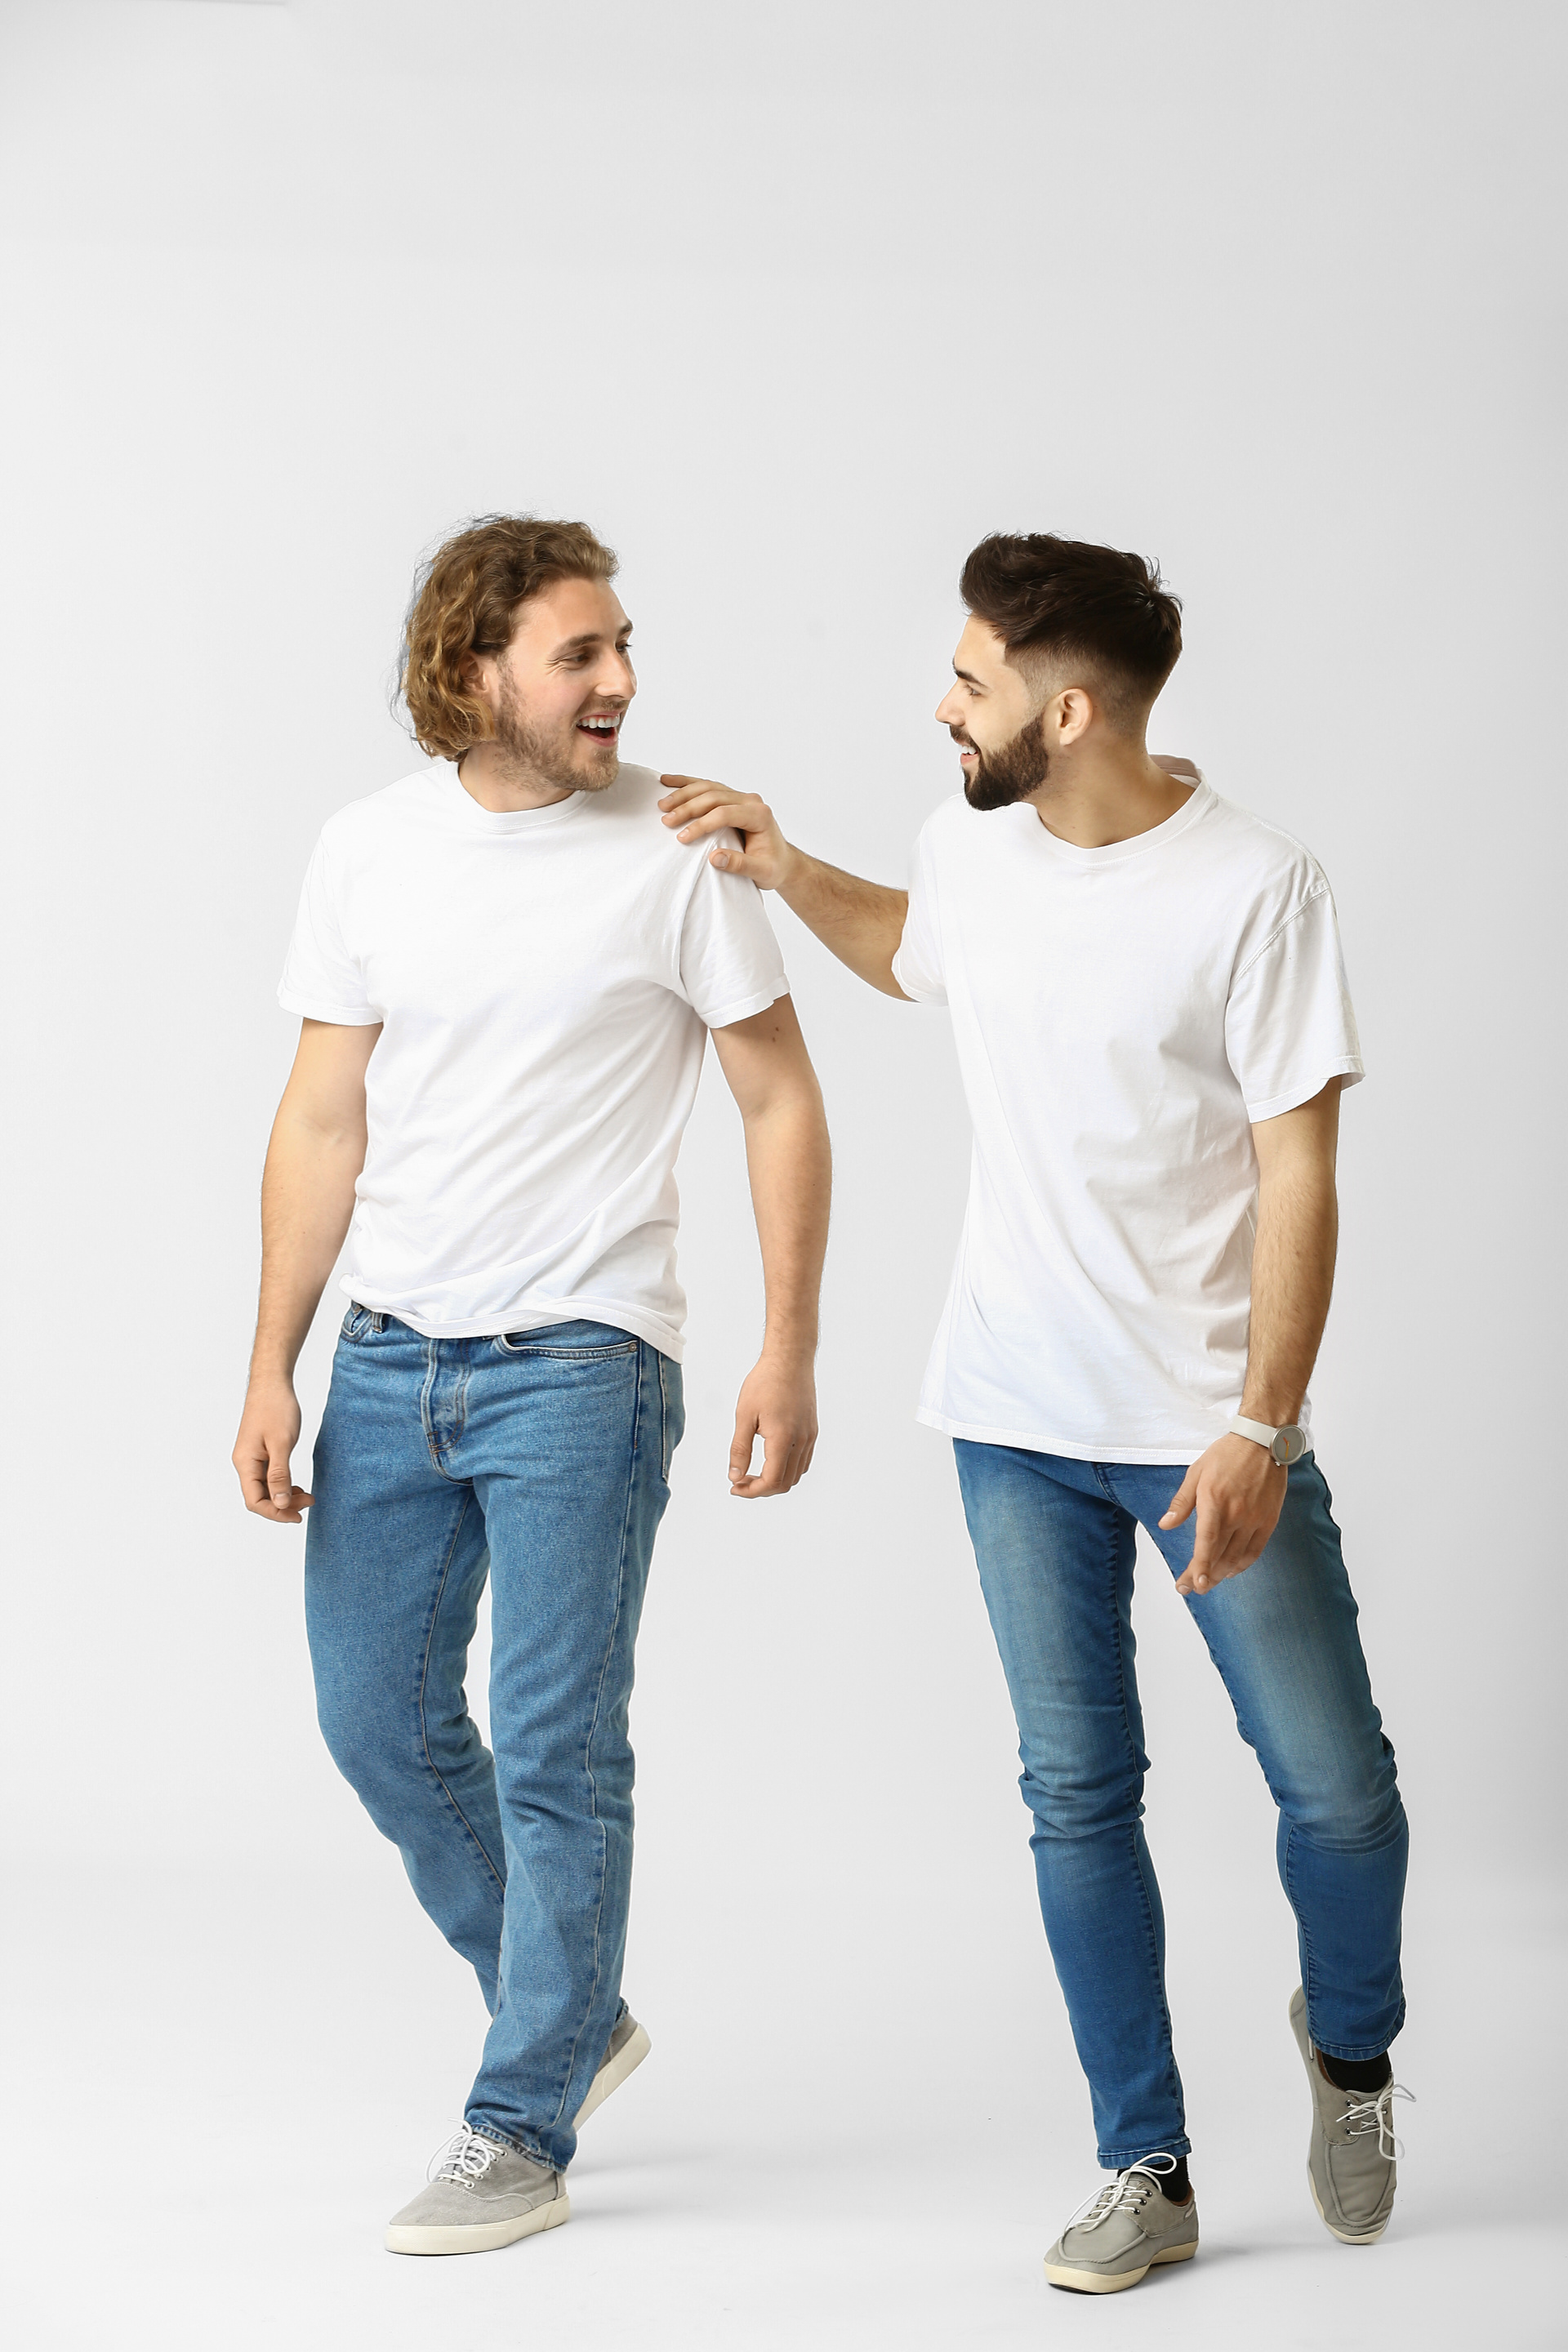 Stylish Young Men in Jeans on White Background